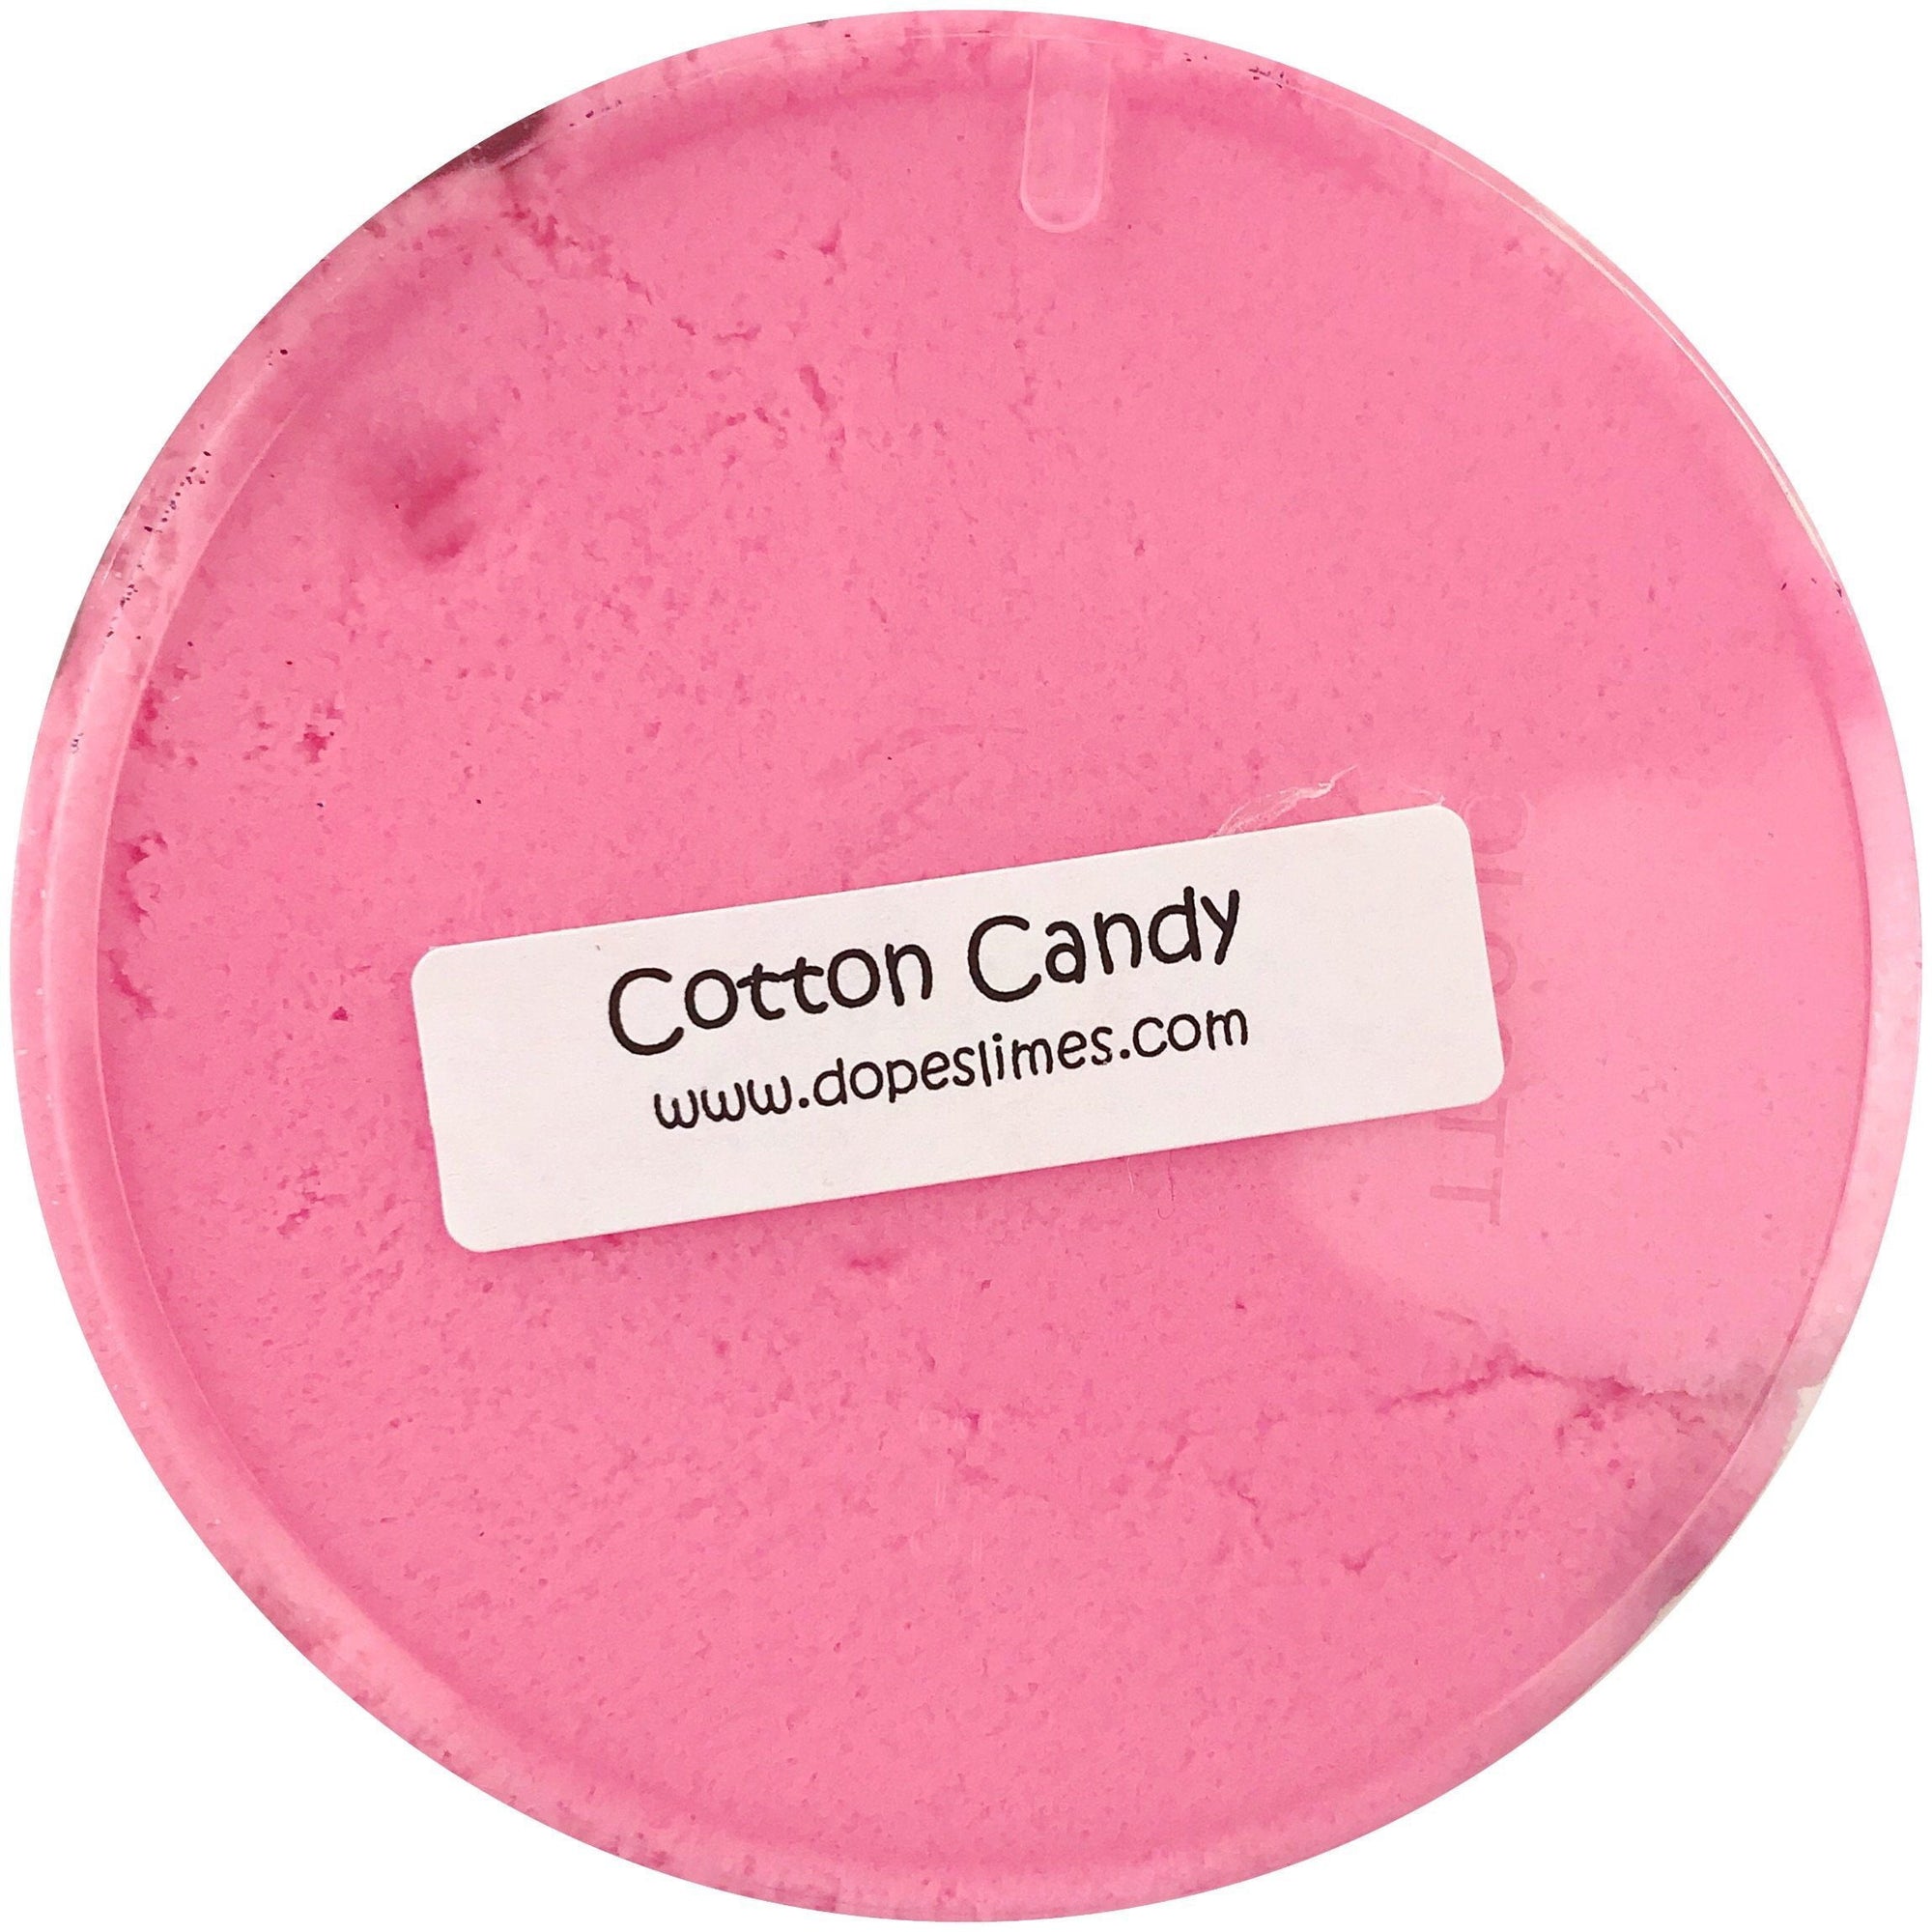 Cotton Candy Cloud Slime Buy Slime Here Dopeslimes Shop